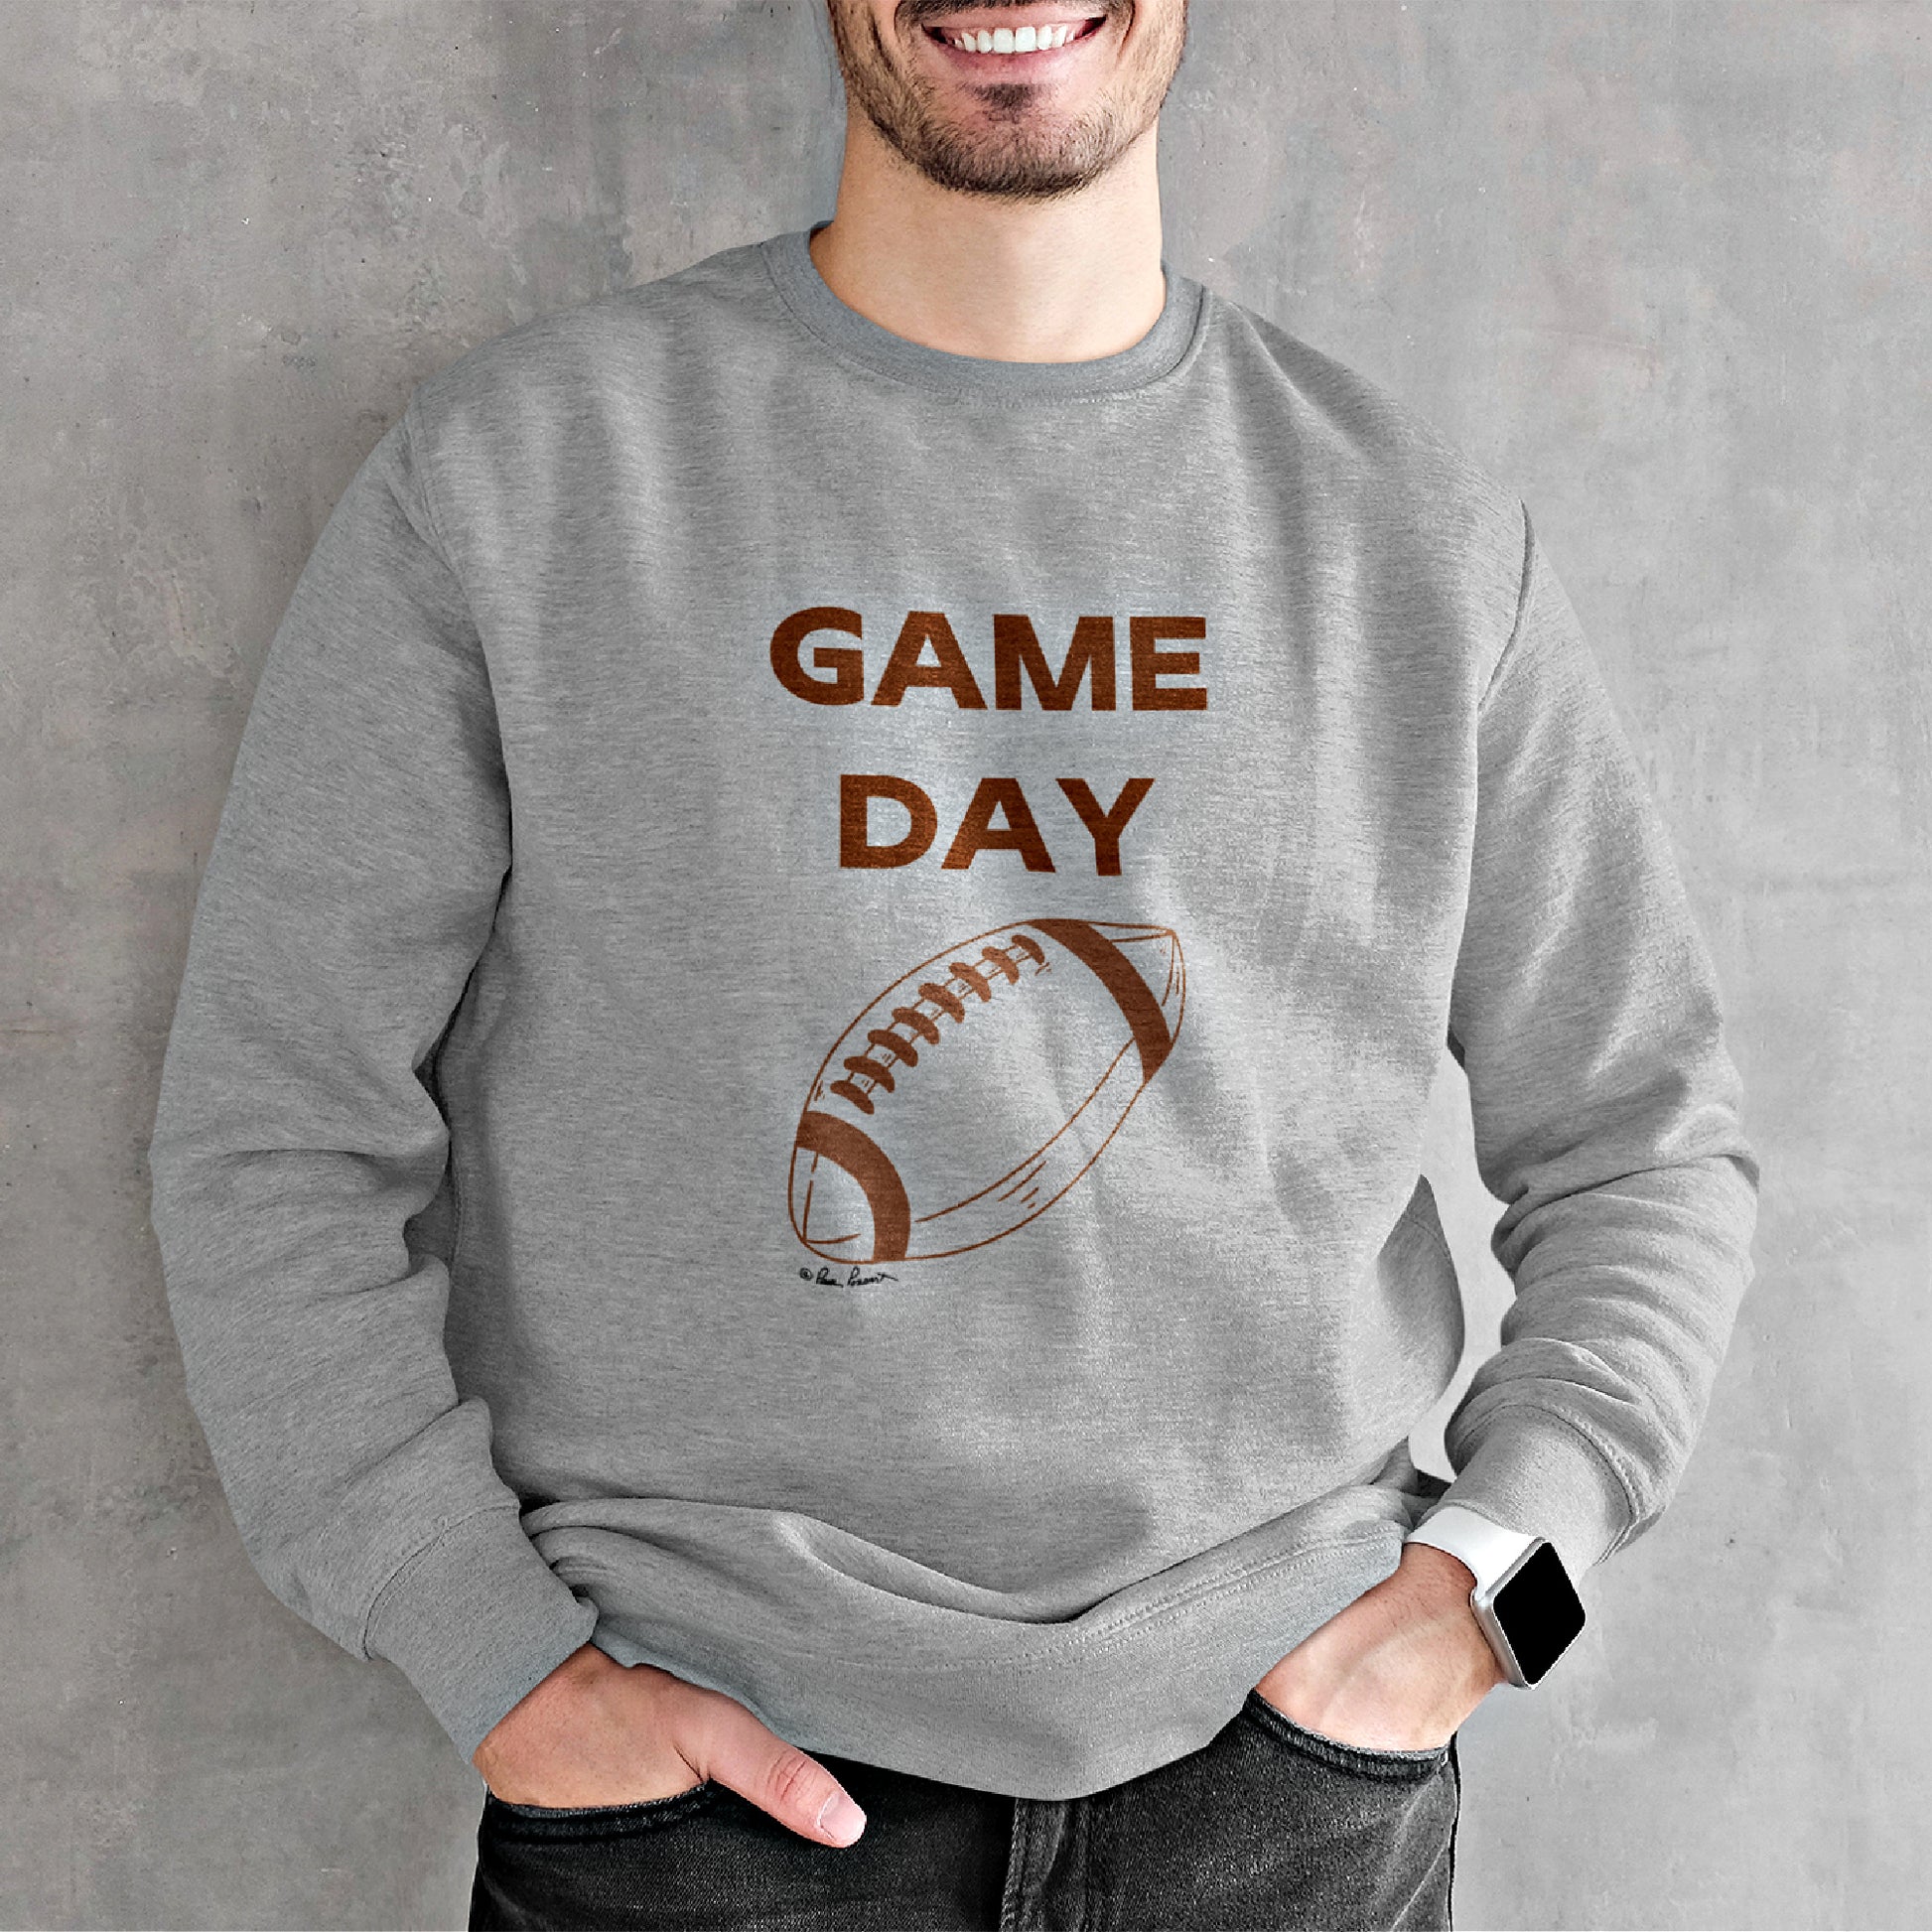 Mock up of a cropped-face smiling man who is wearing our Sport Grey sweatshirt